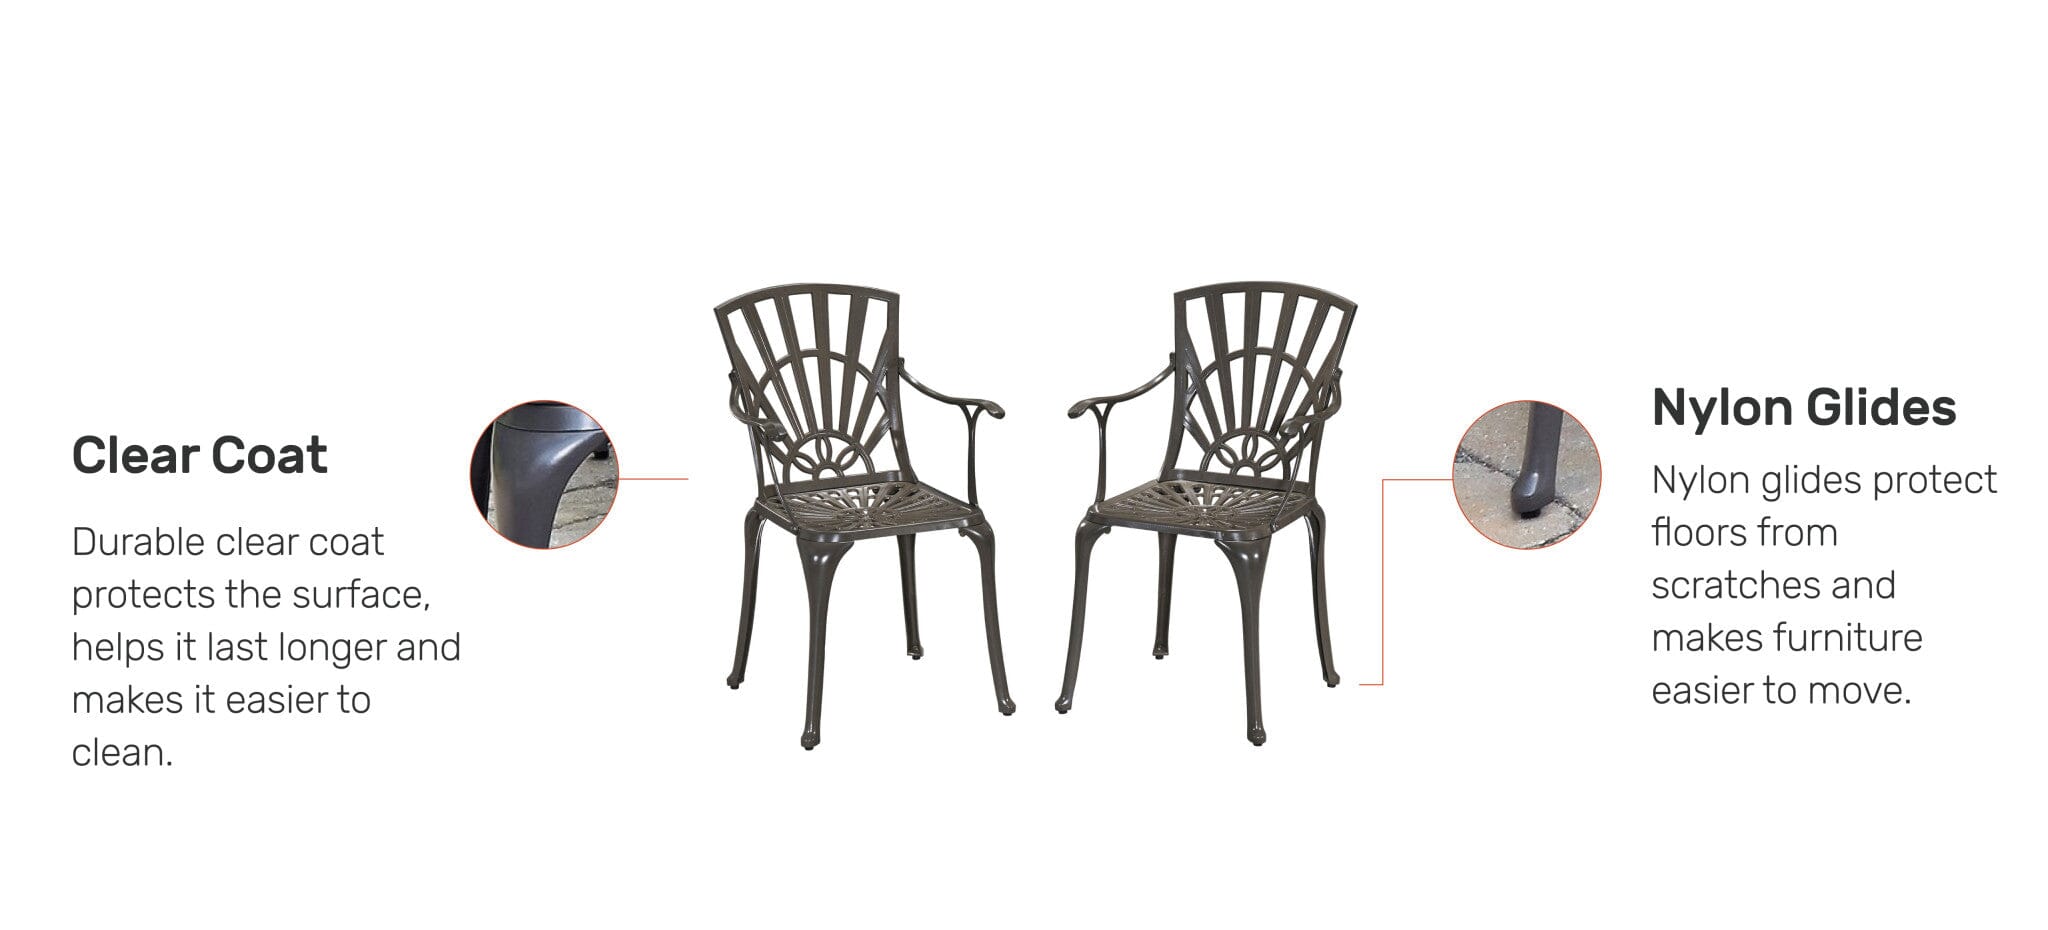 Traditional Outdoor Chair Pair By Grenada Outdoor Chair Grenada